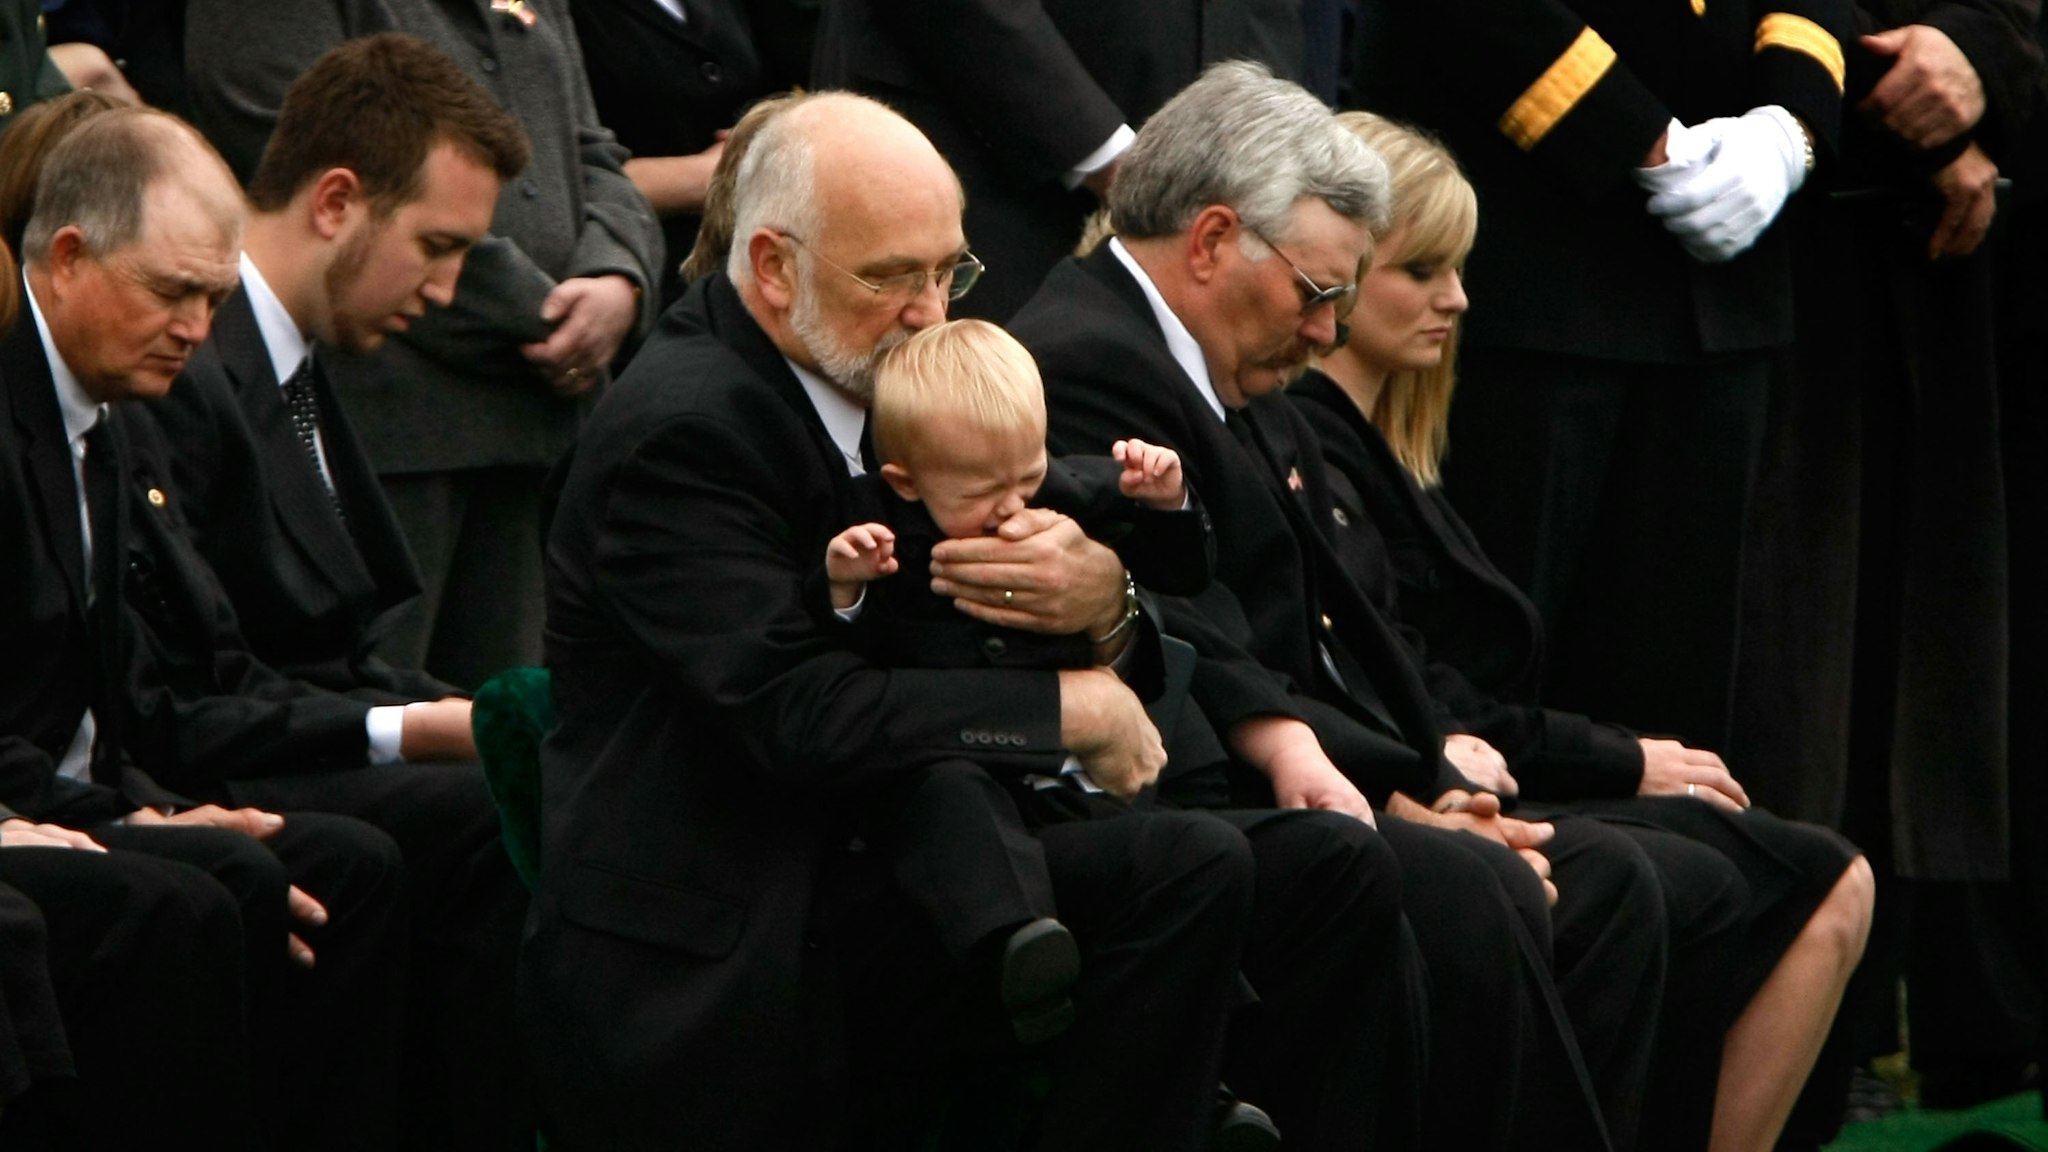 ARLINGTON, WA - APRIL 08: Peter Hake comforts his 18-month old grandson Gage during the burial service for his son, Army SSG Christopher M. Hake, at Arlington National Cemetery April 8, 2008 in Arlington, Virginia.